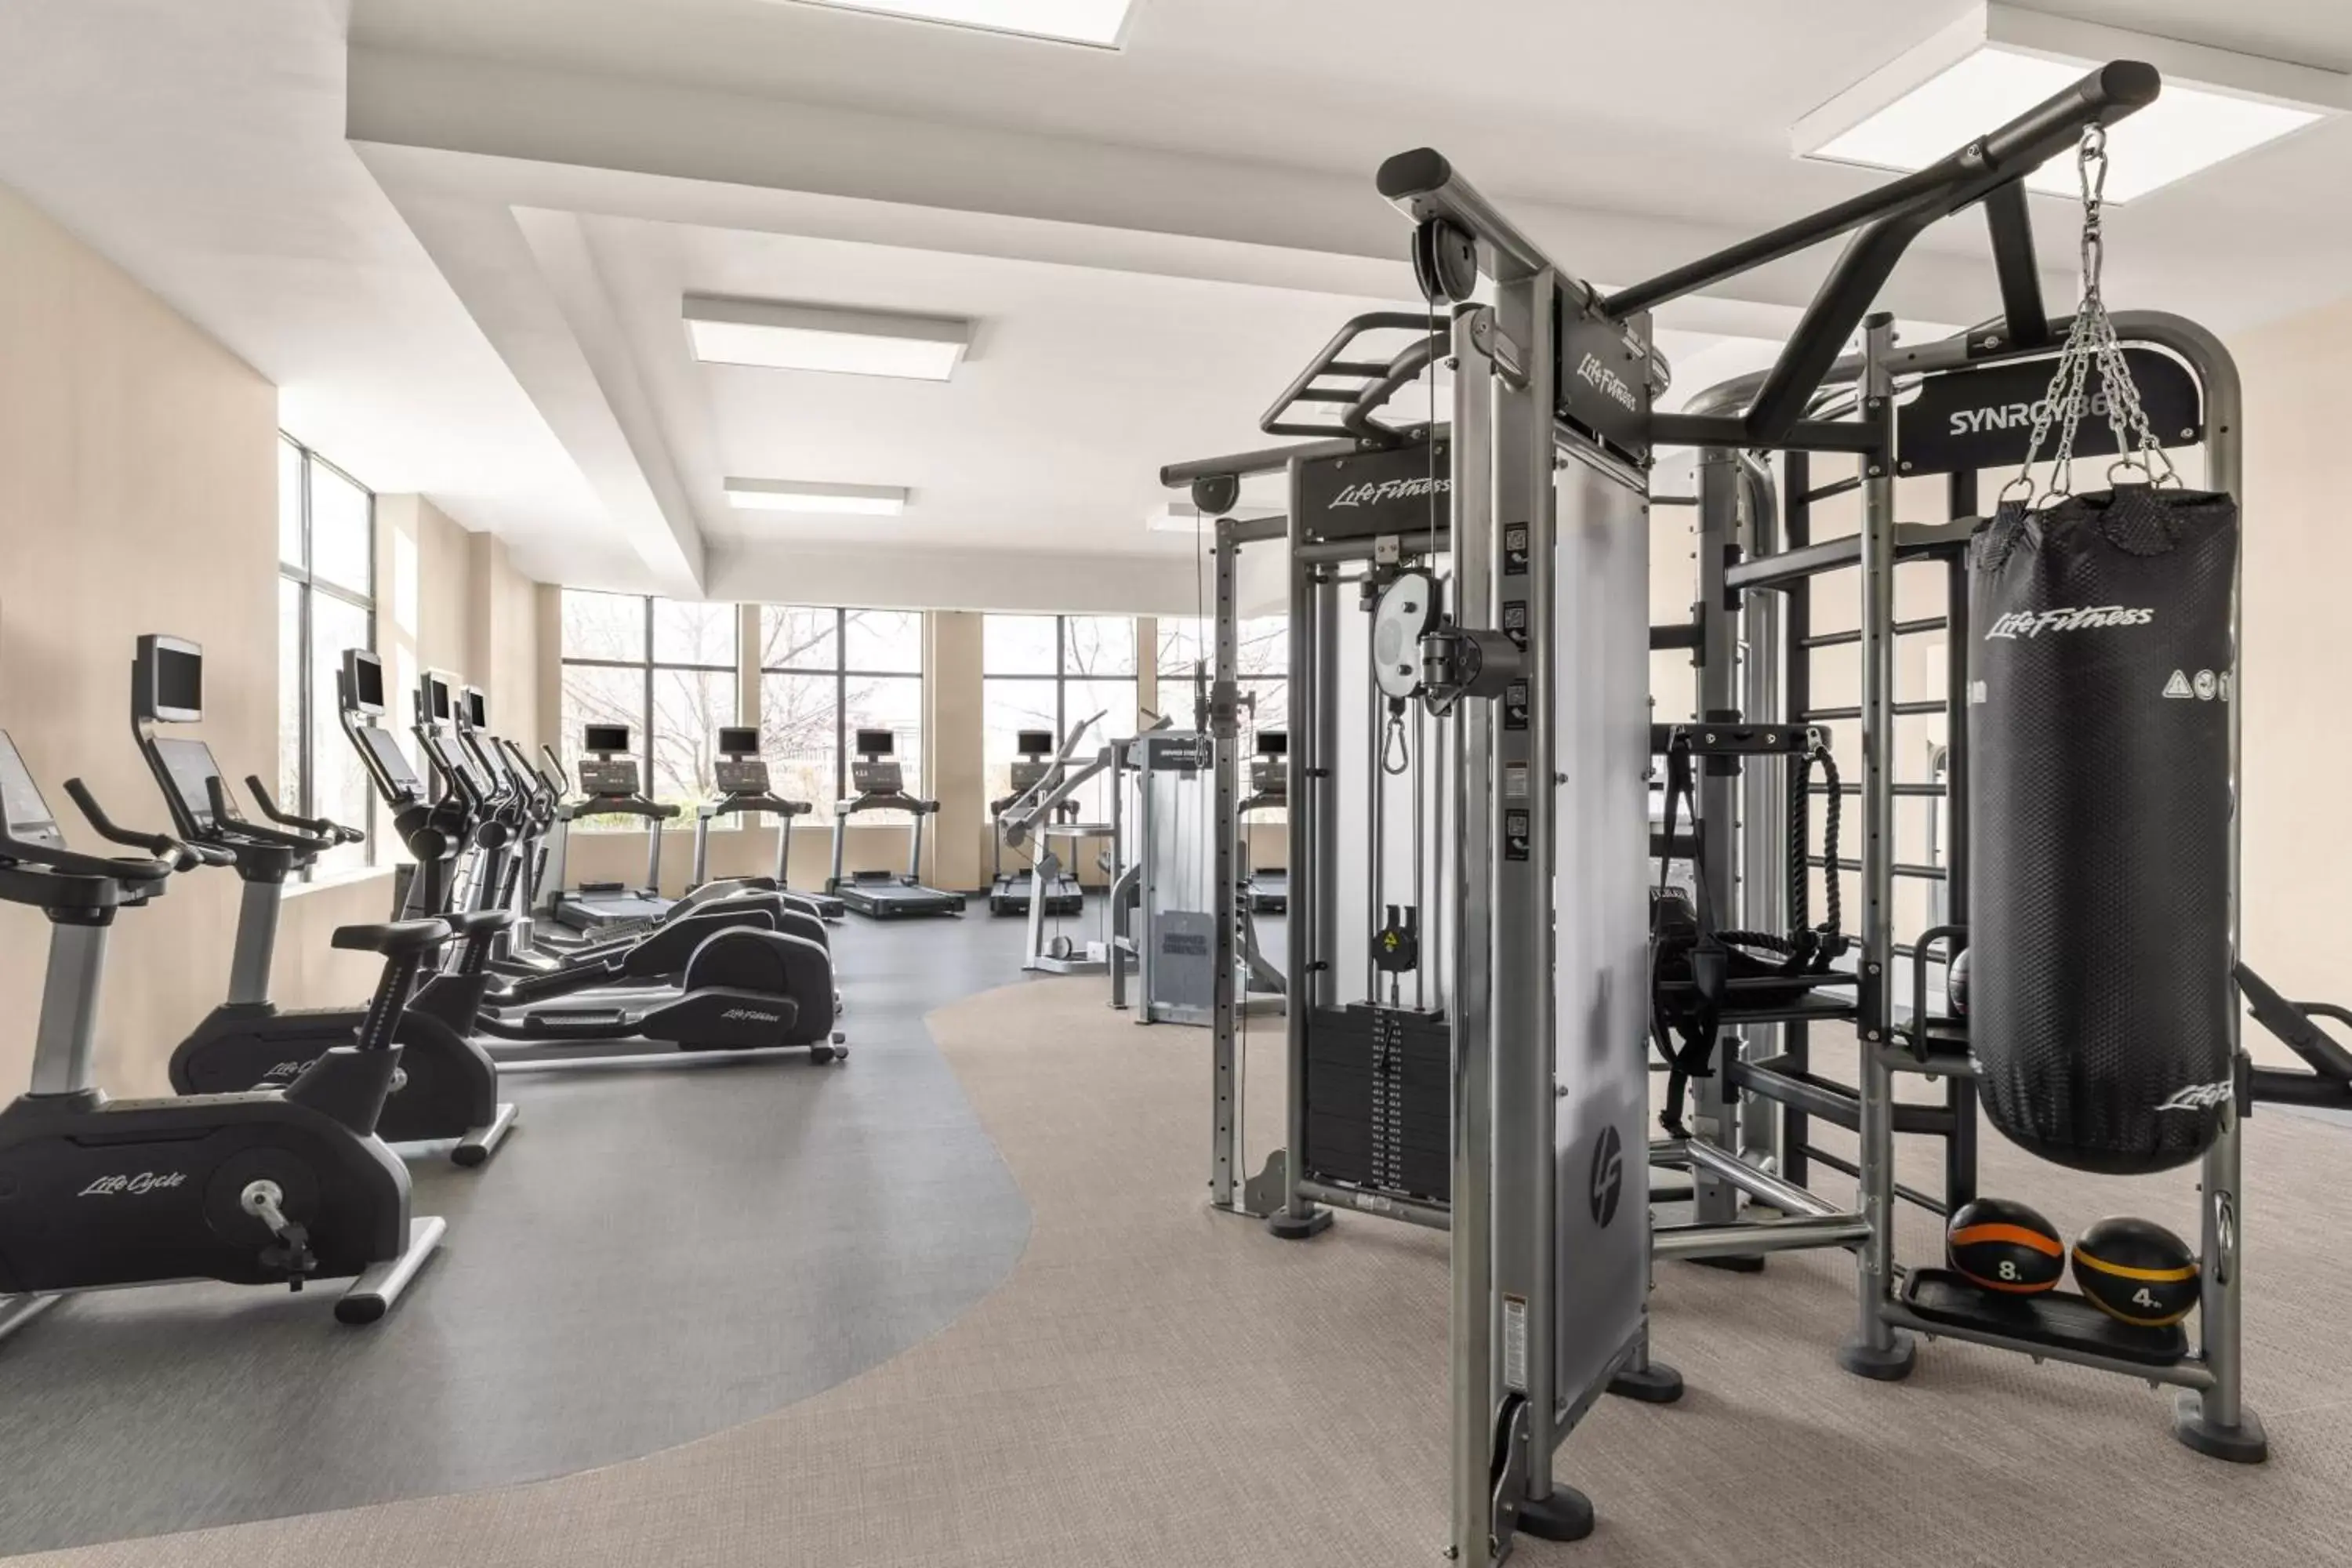 Fitness centre/facilities, Fitness Center/Facilities in Courtyard Republic Airport Long Island/Farmingdale